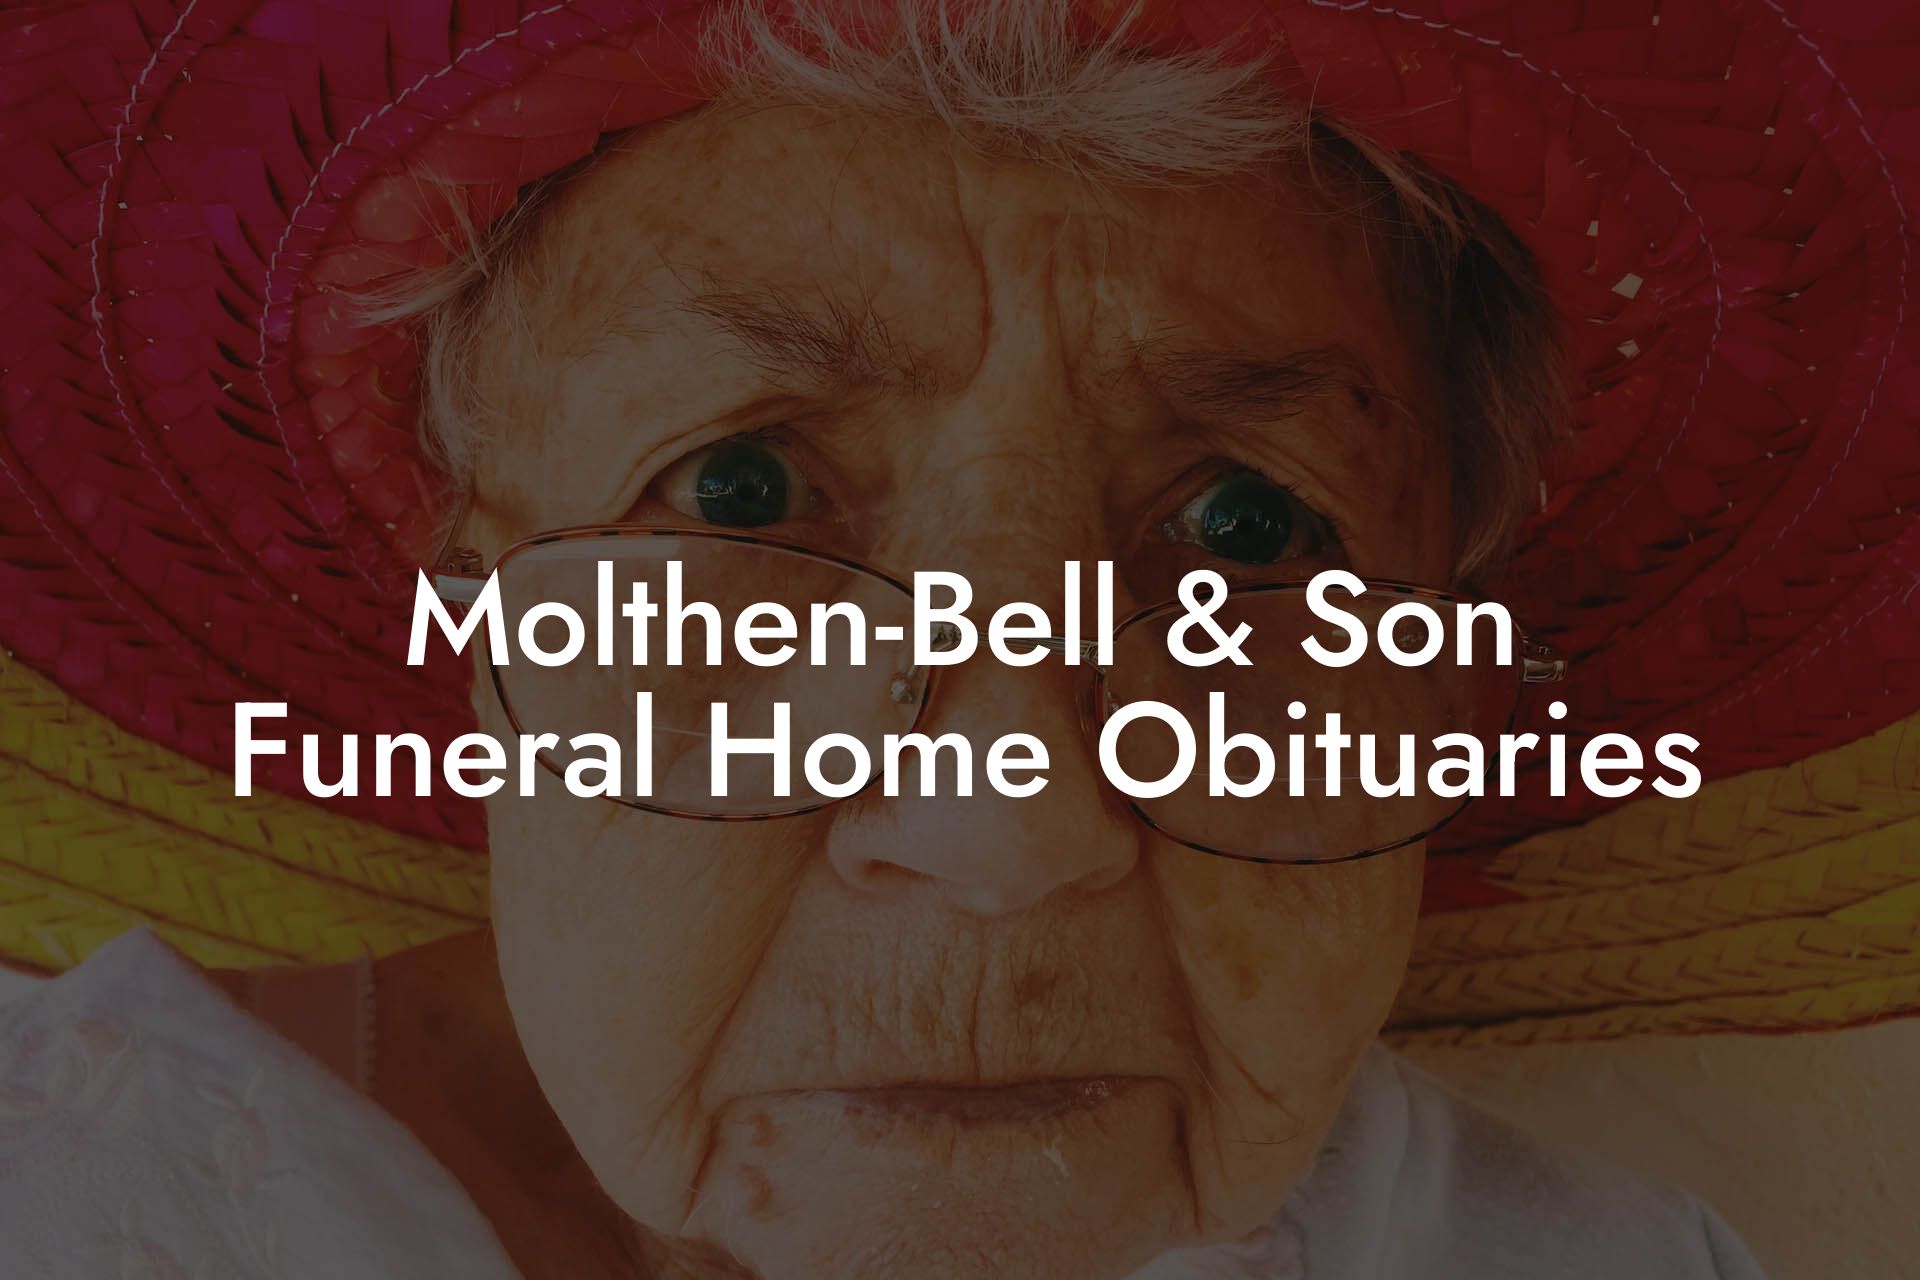 Molthen-Bell & Son Funeral Home Obituaries